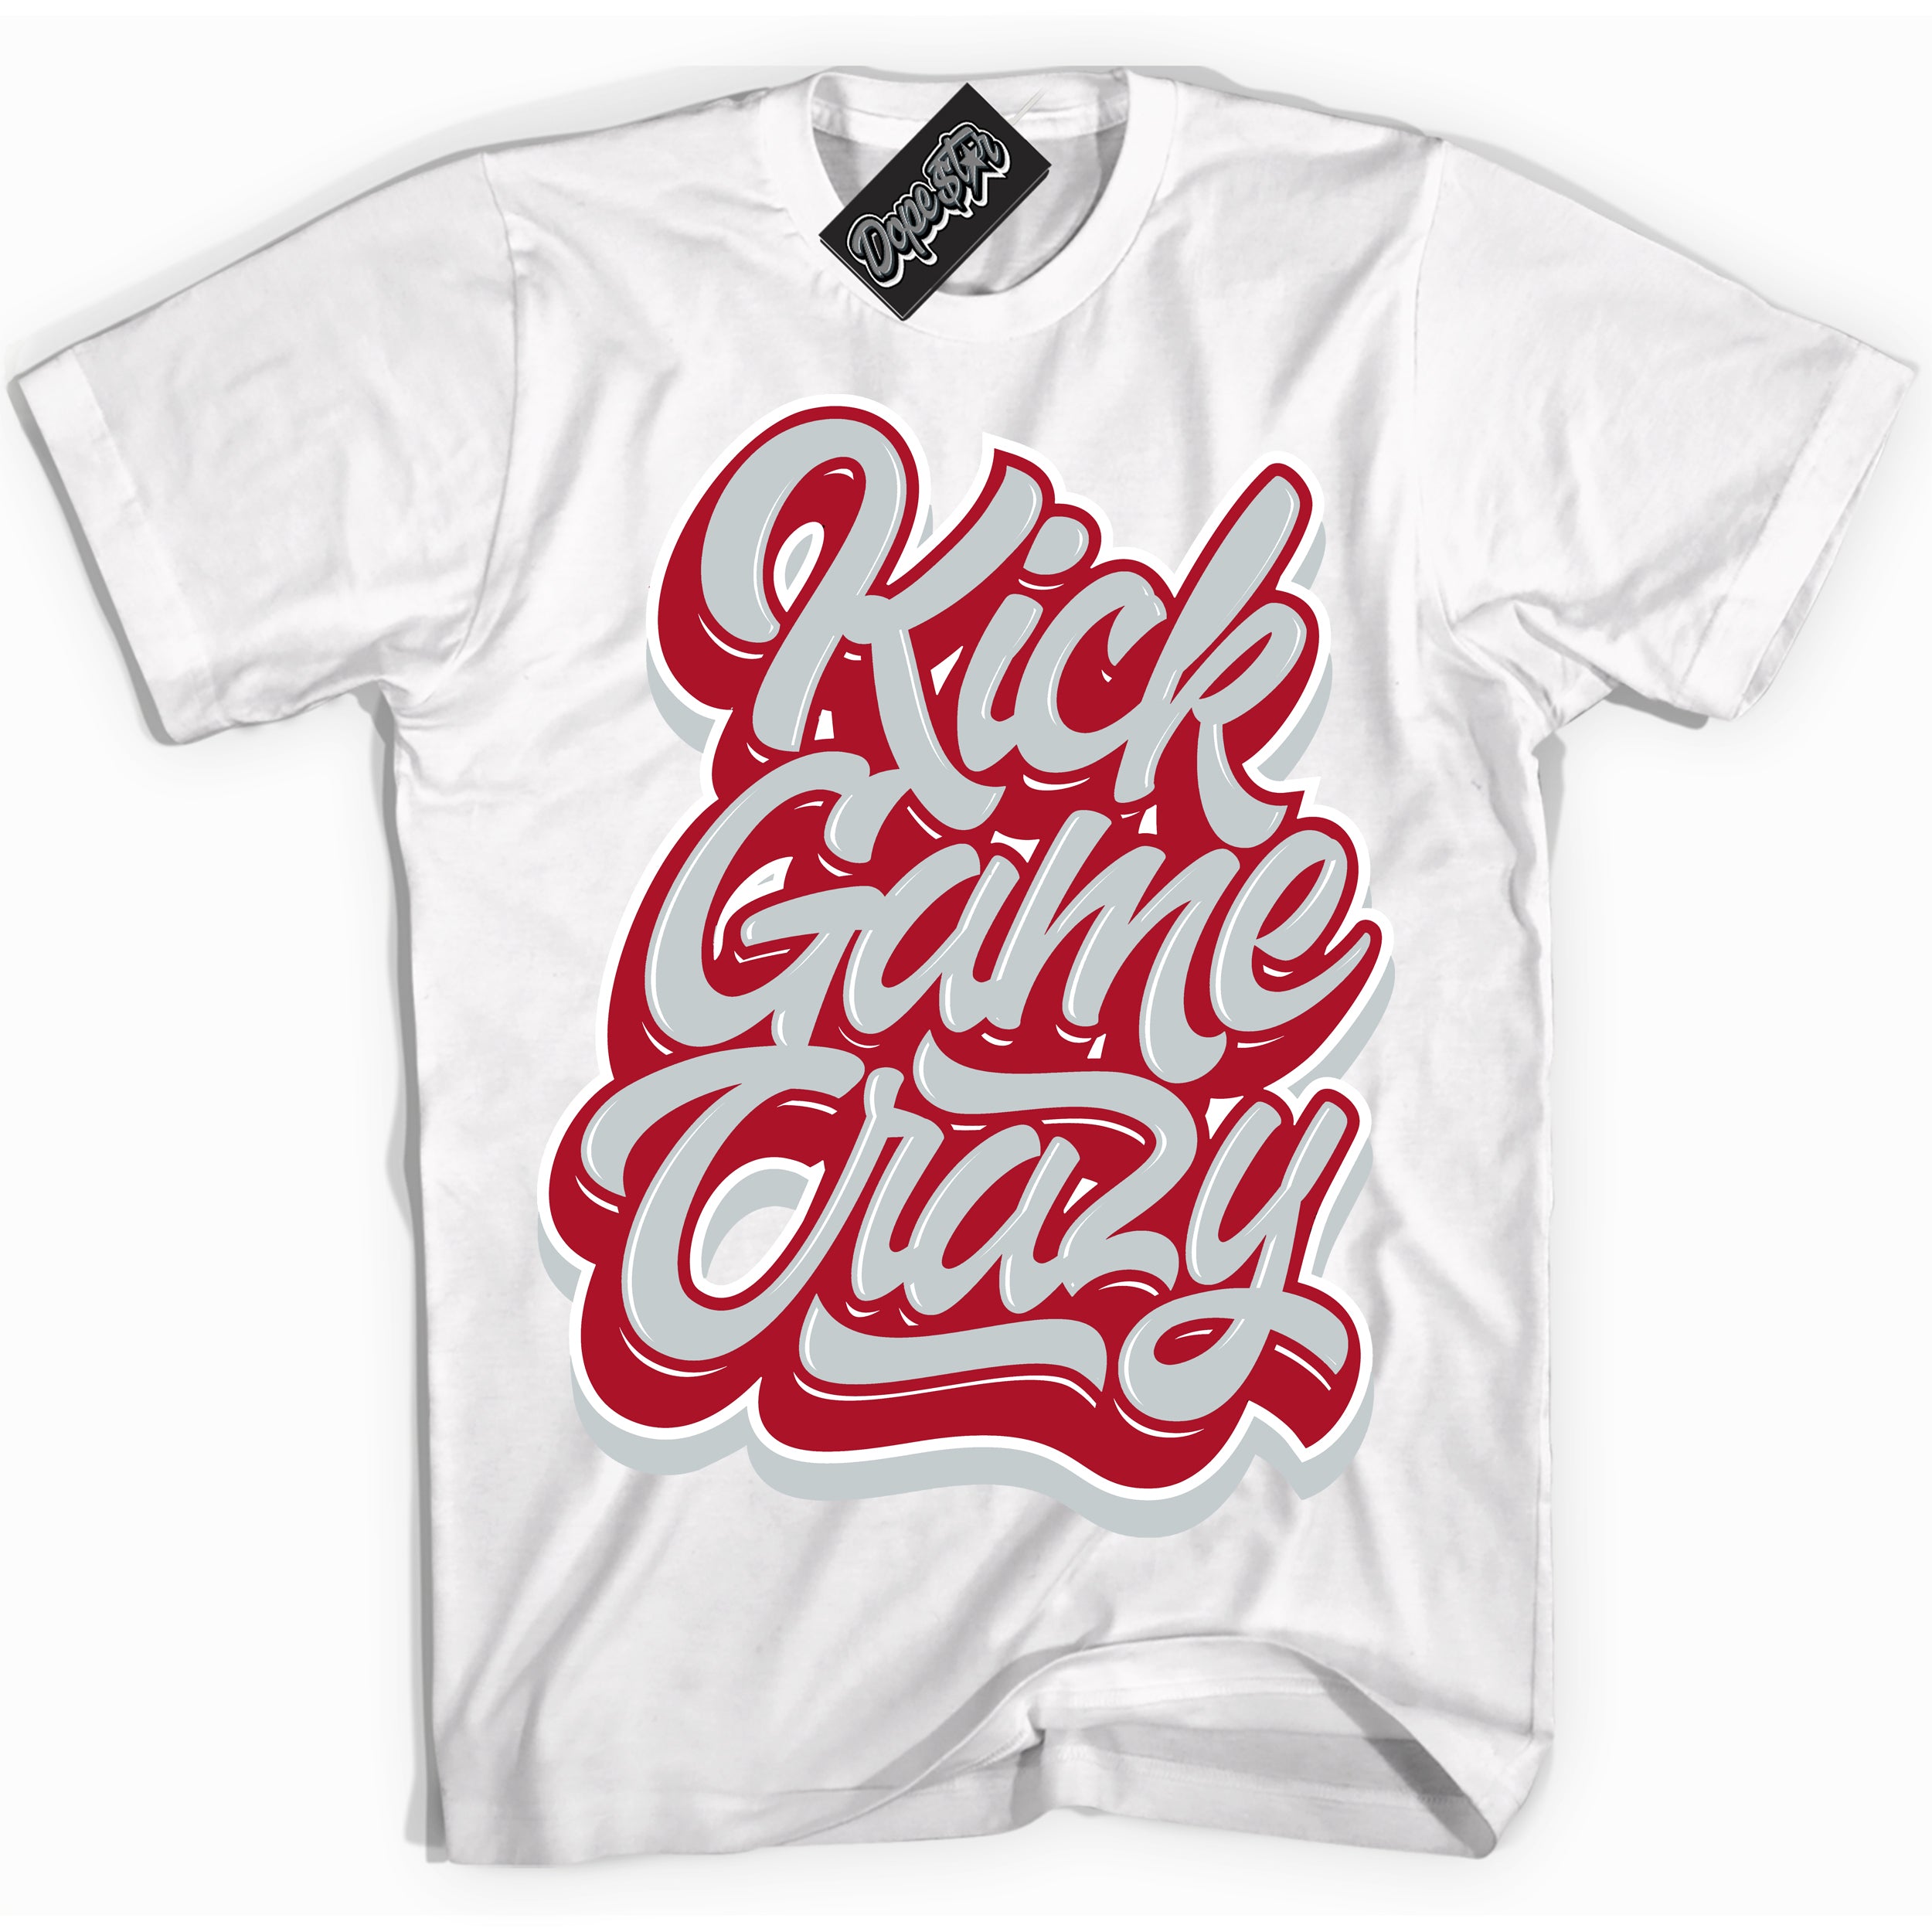 Cool White Shirt with “ Kick Game Crazy” design that perfectly matches Reverse Ultraman Sneakers.